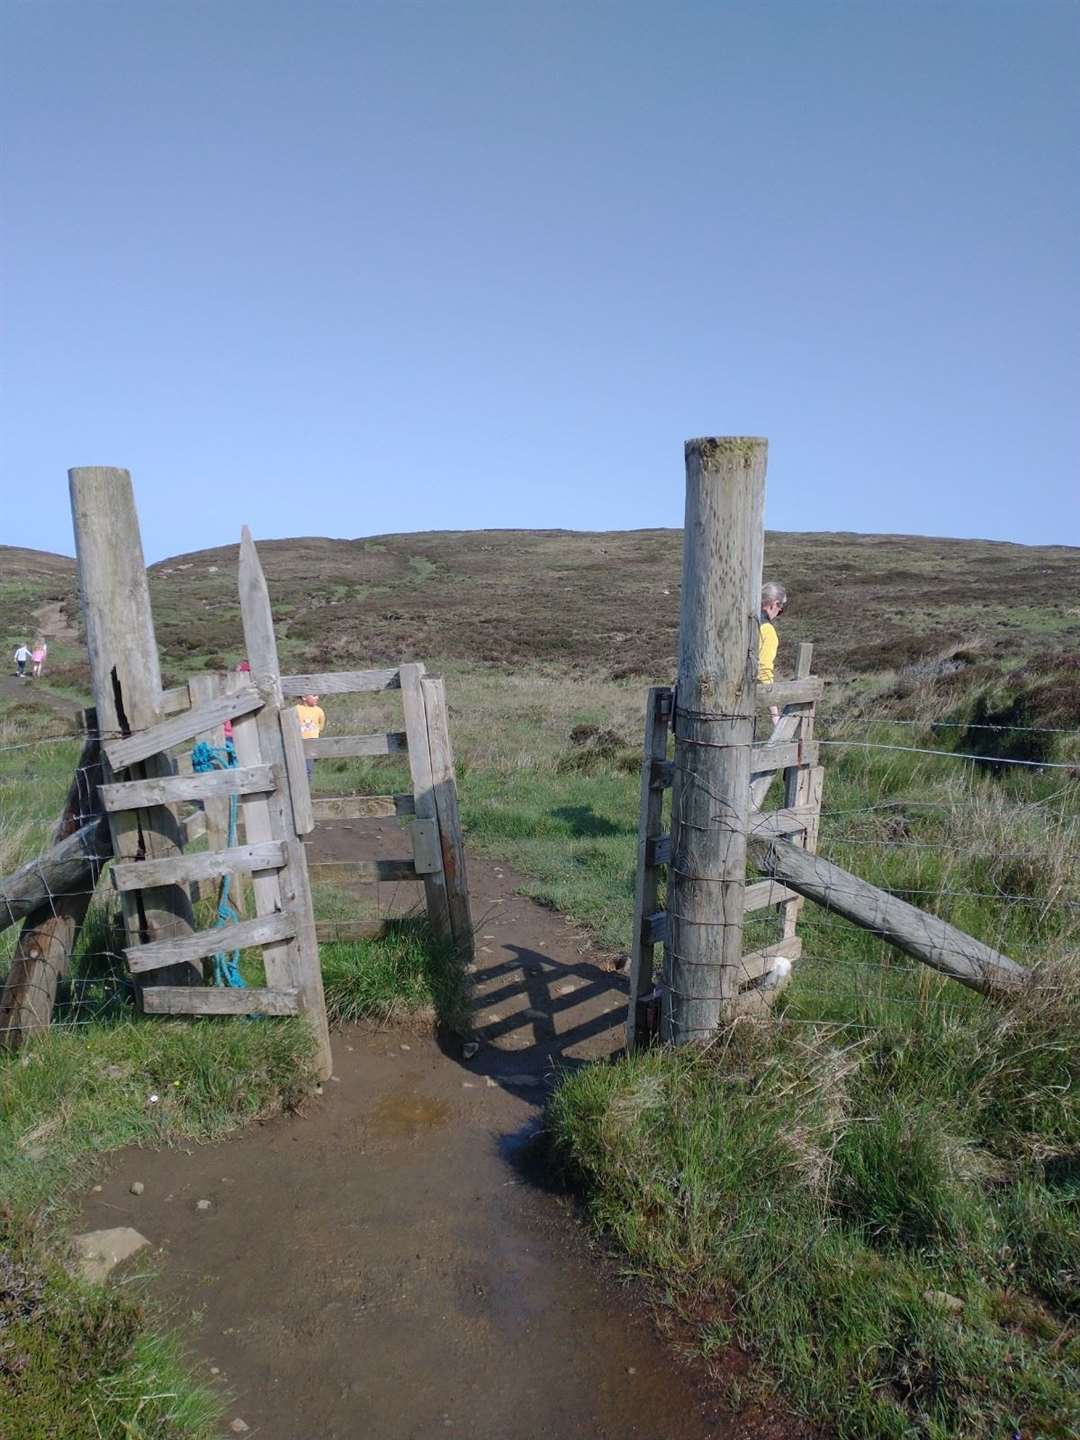 A gate around halway along the route.